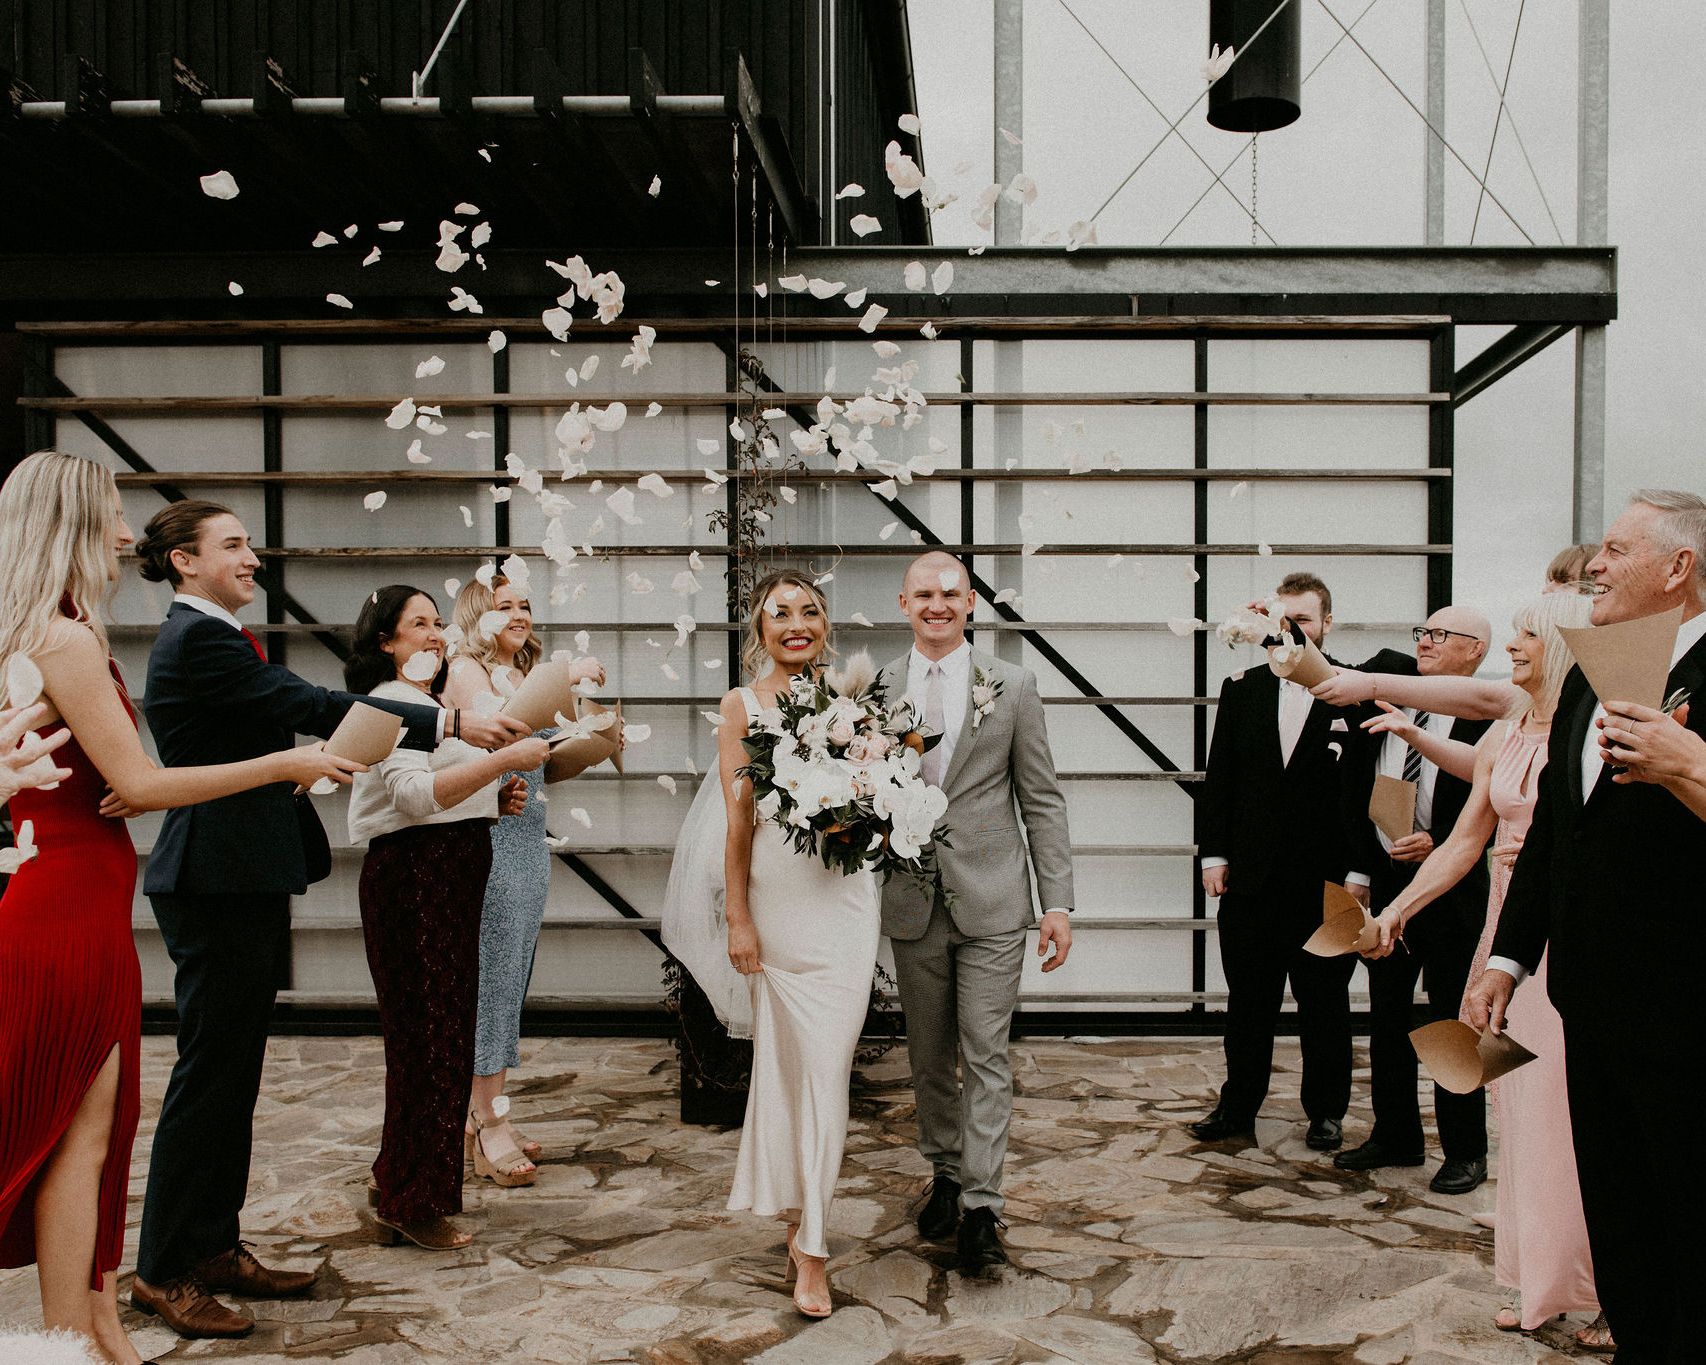 Zonzo Estate Elopement bride and groom exit guests throw rose petals in the air Lets Elope Melbourne Celebrant Photography Elopement Package Victoria Sarah Matler Photography Yarra Valley Winery intimate Wedding Photos